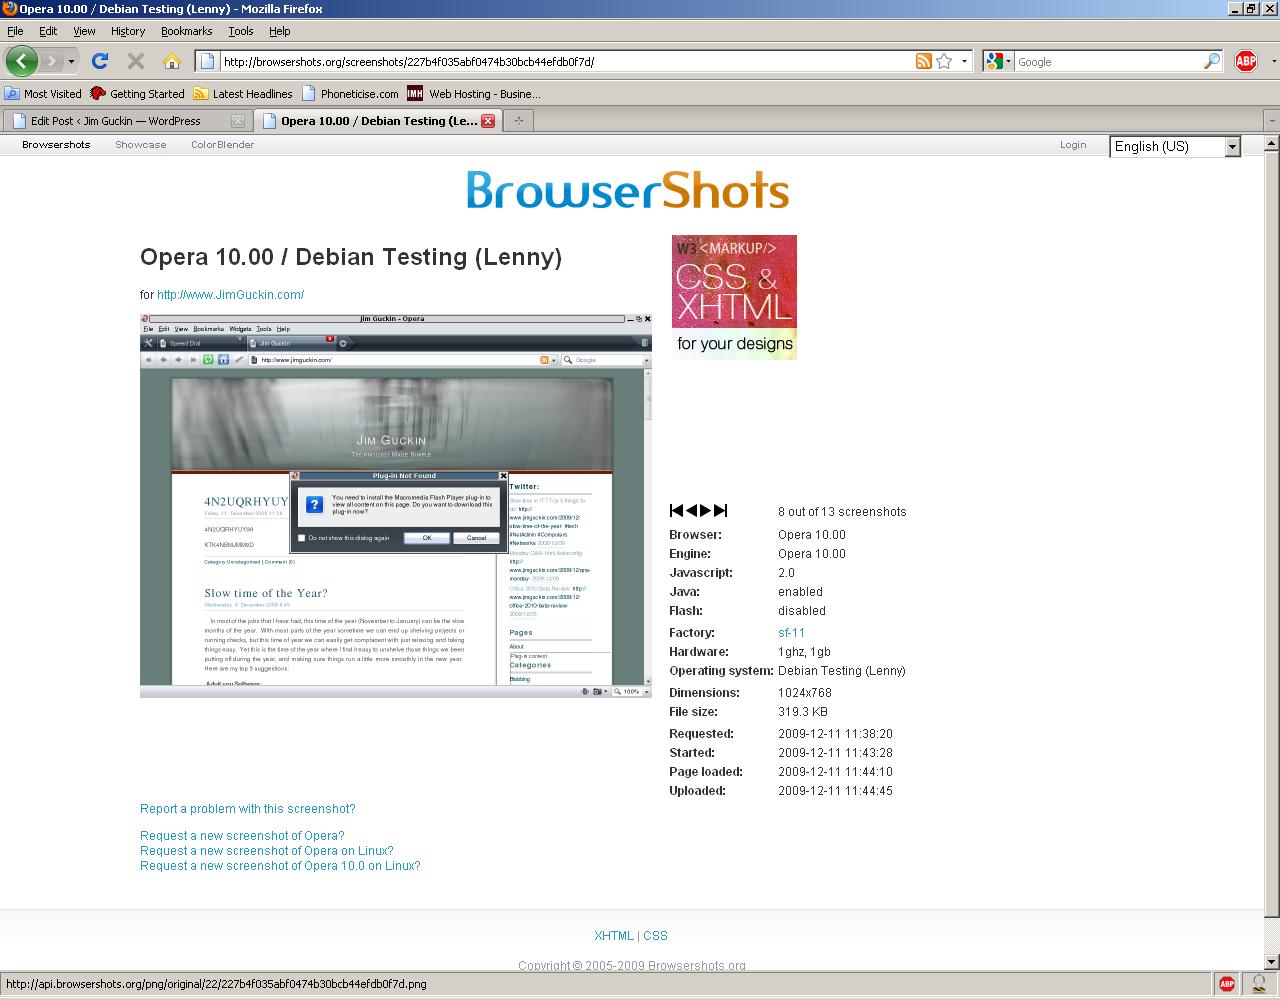 A Drill Down view of the site in a browser